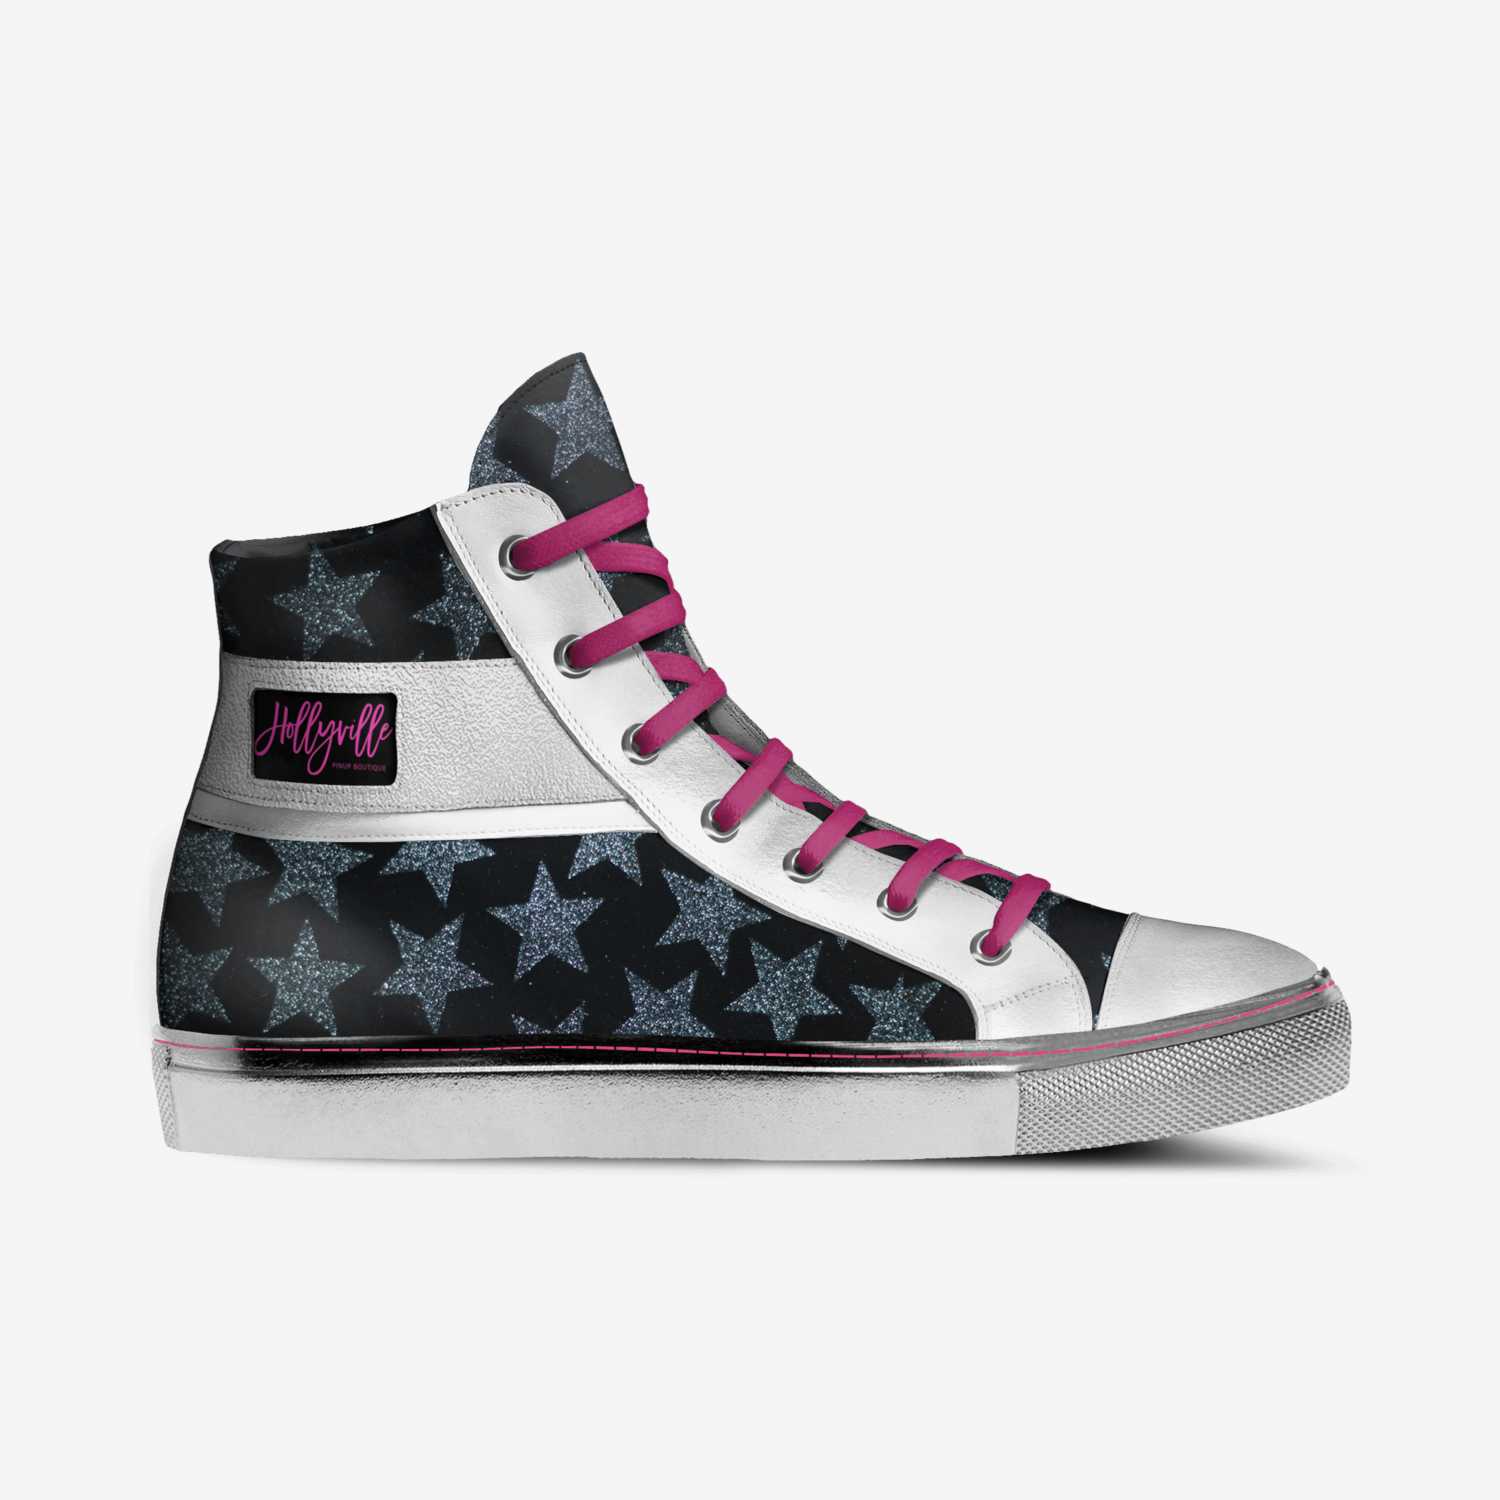 Hollyicious Star Classic High Top Sneakers by Hollyville